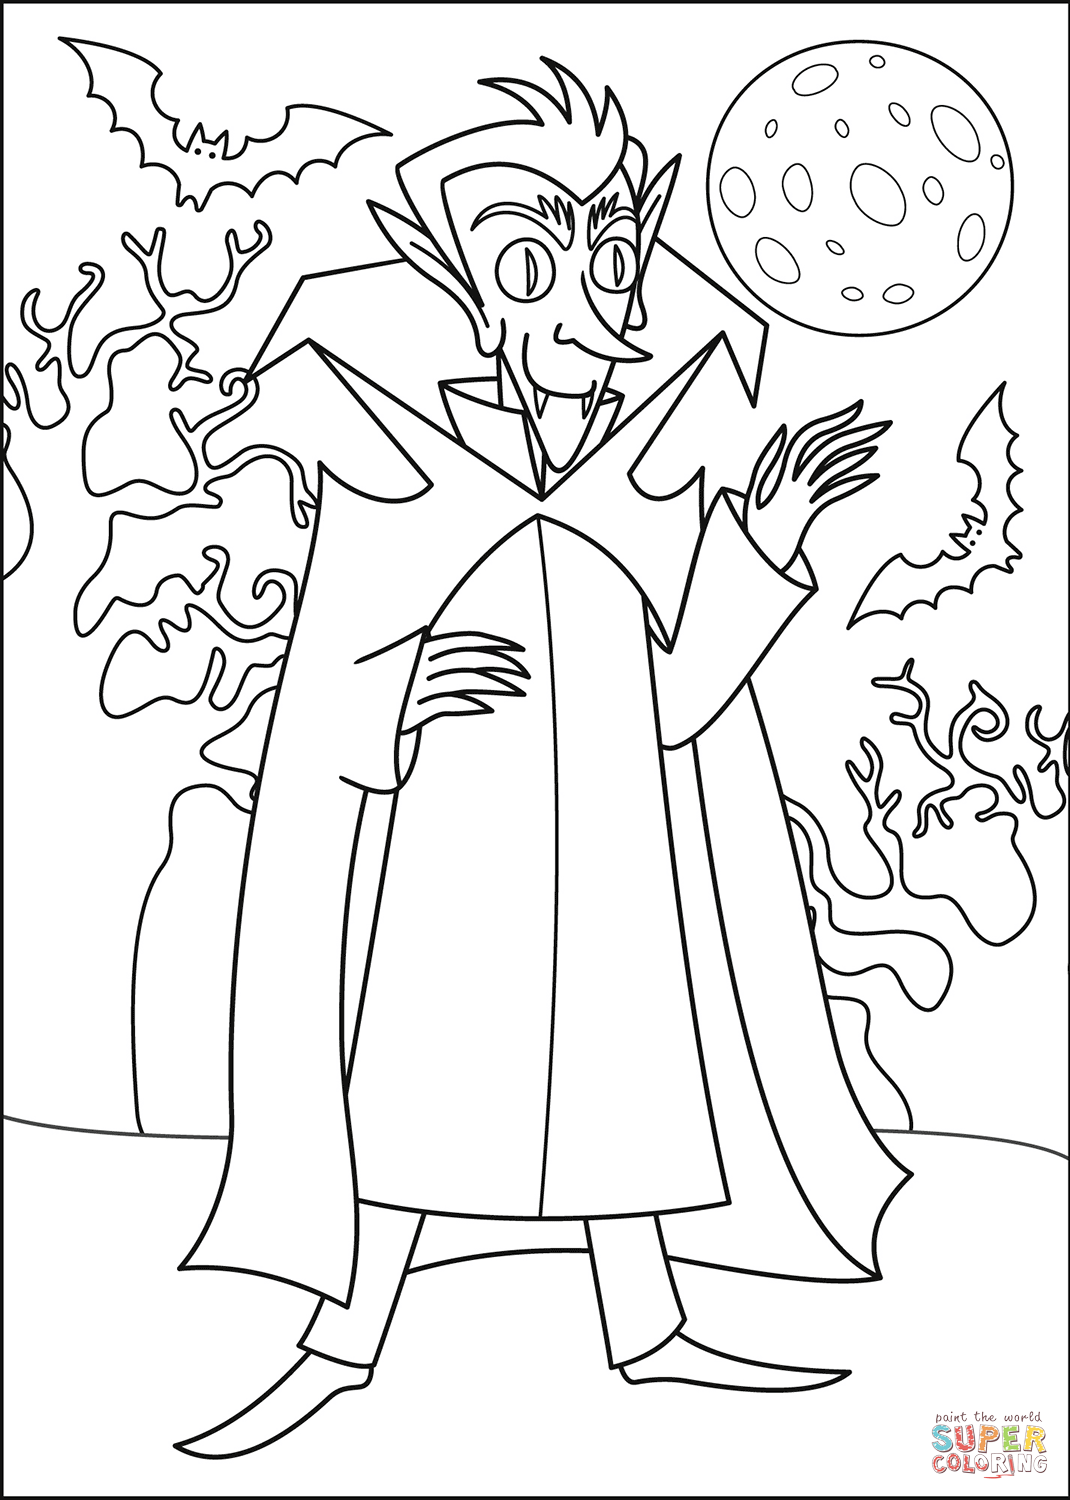 Vampire coloring page free printable coloring pages